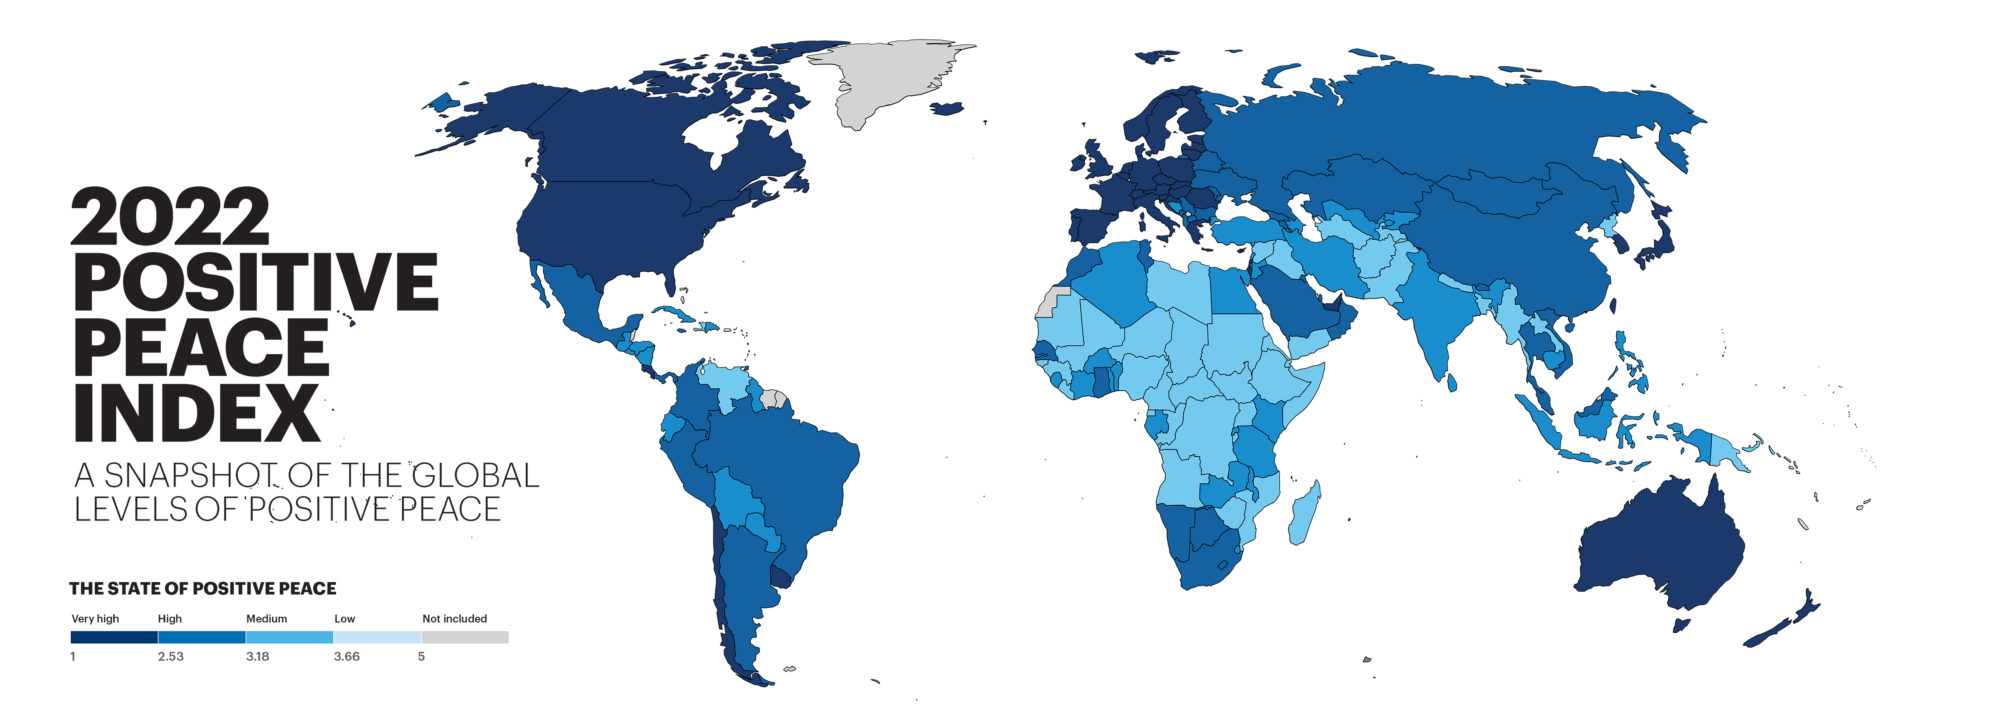 World map with countries in shades of blue on white background and map key of peace levels.